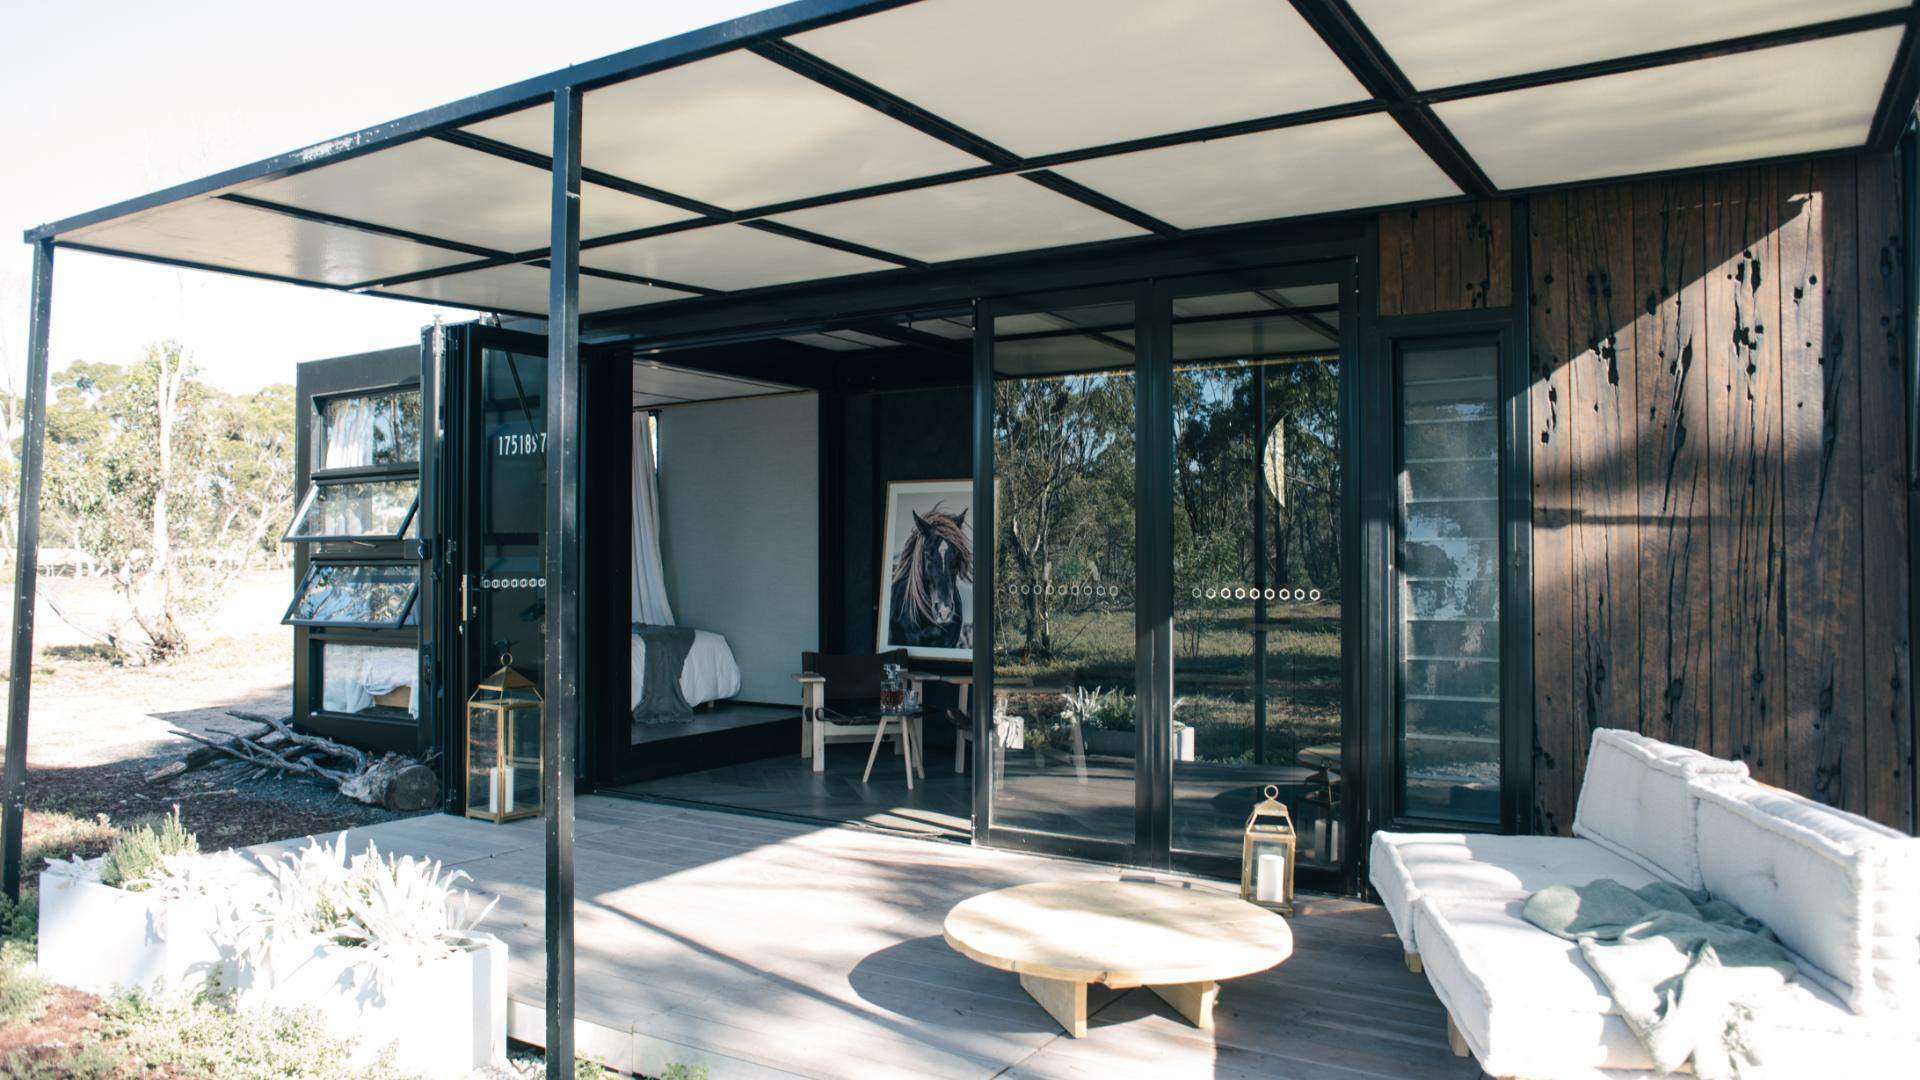 Two Shipping Container Hotels Are Popping Up in Victoria's Wine Country This Autumn